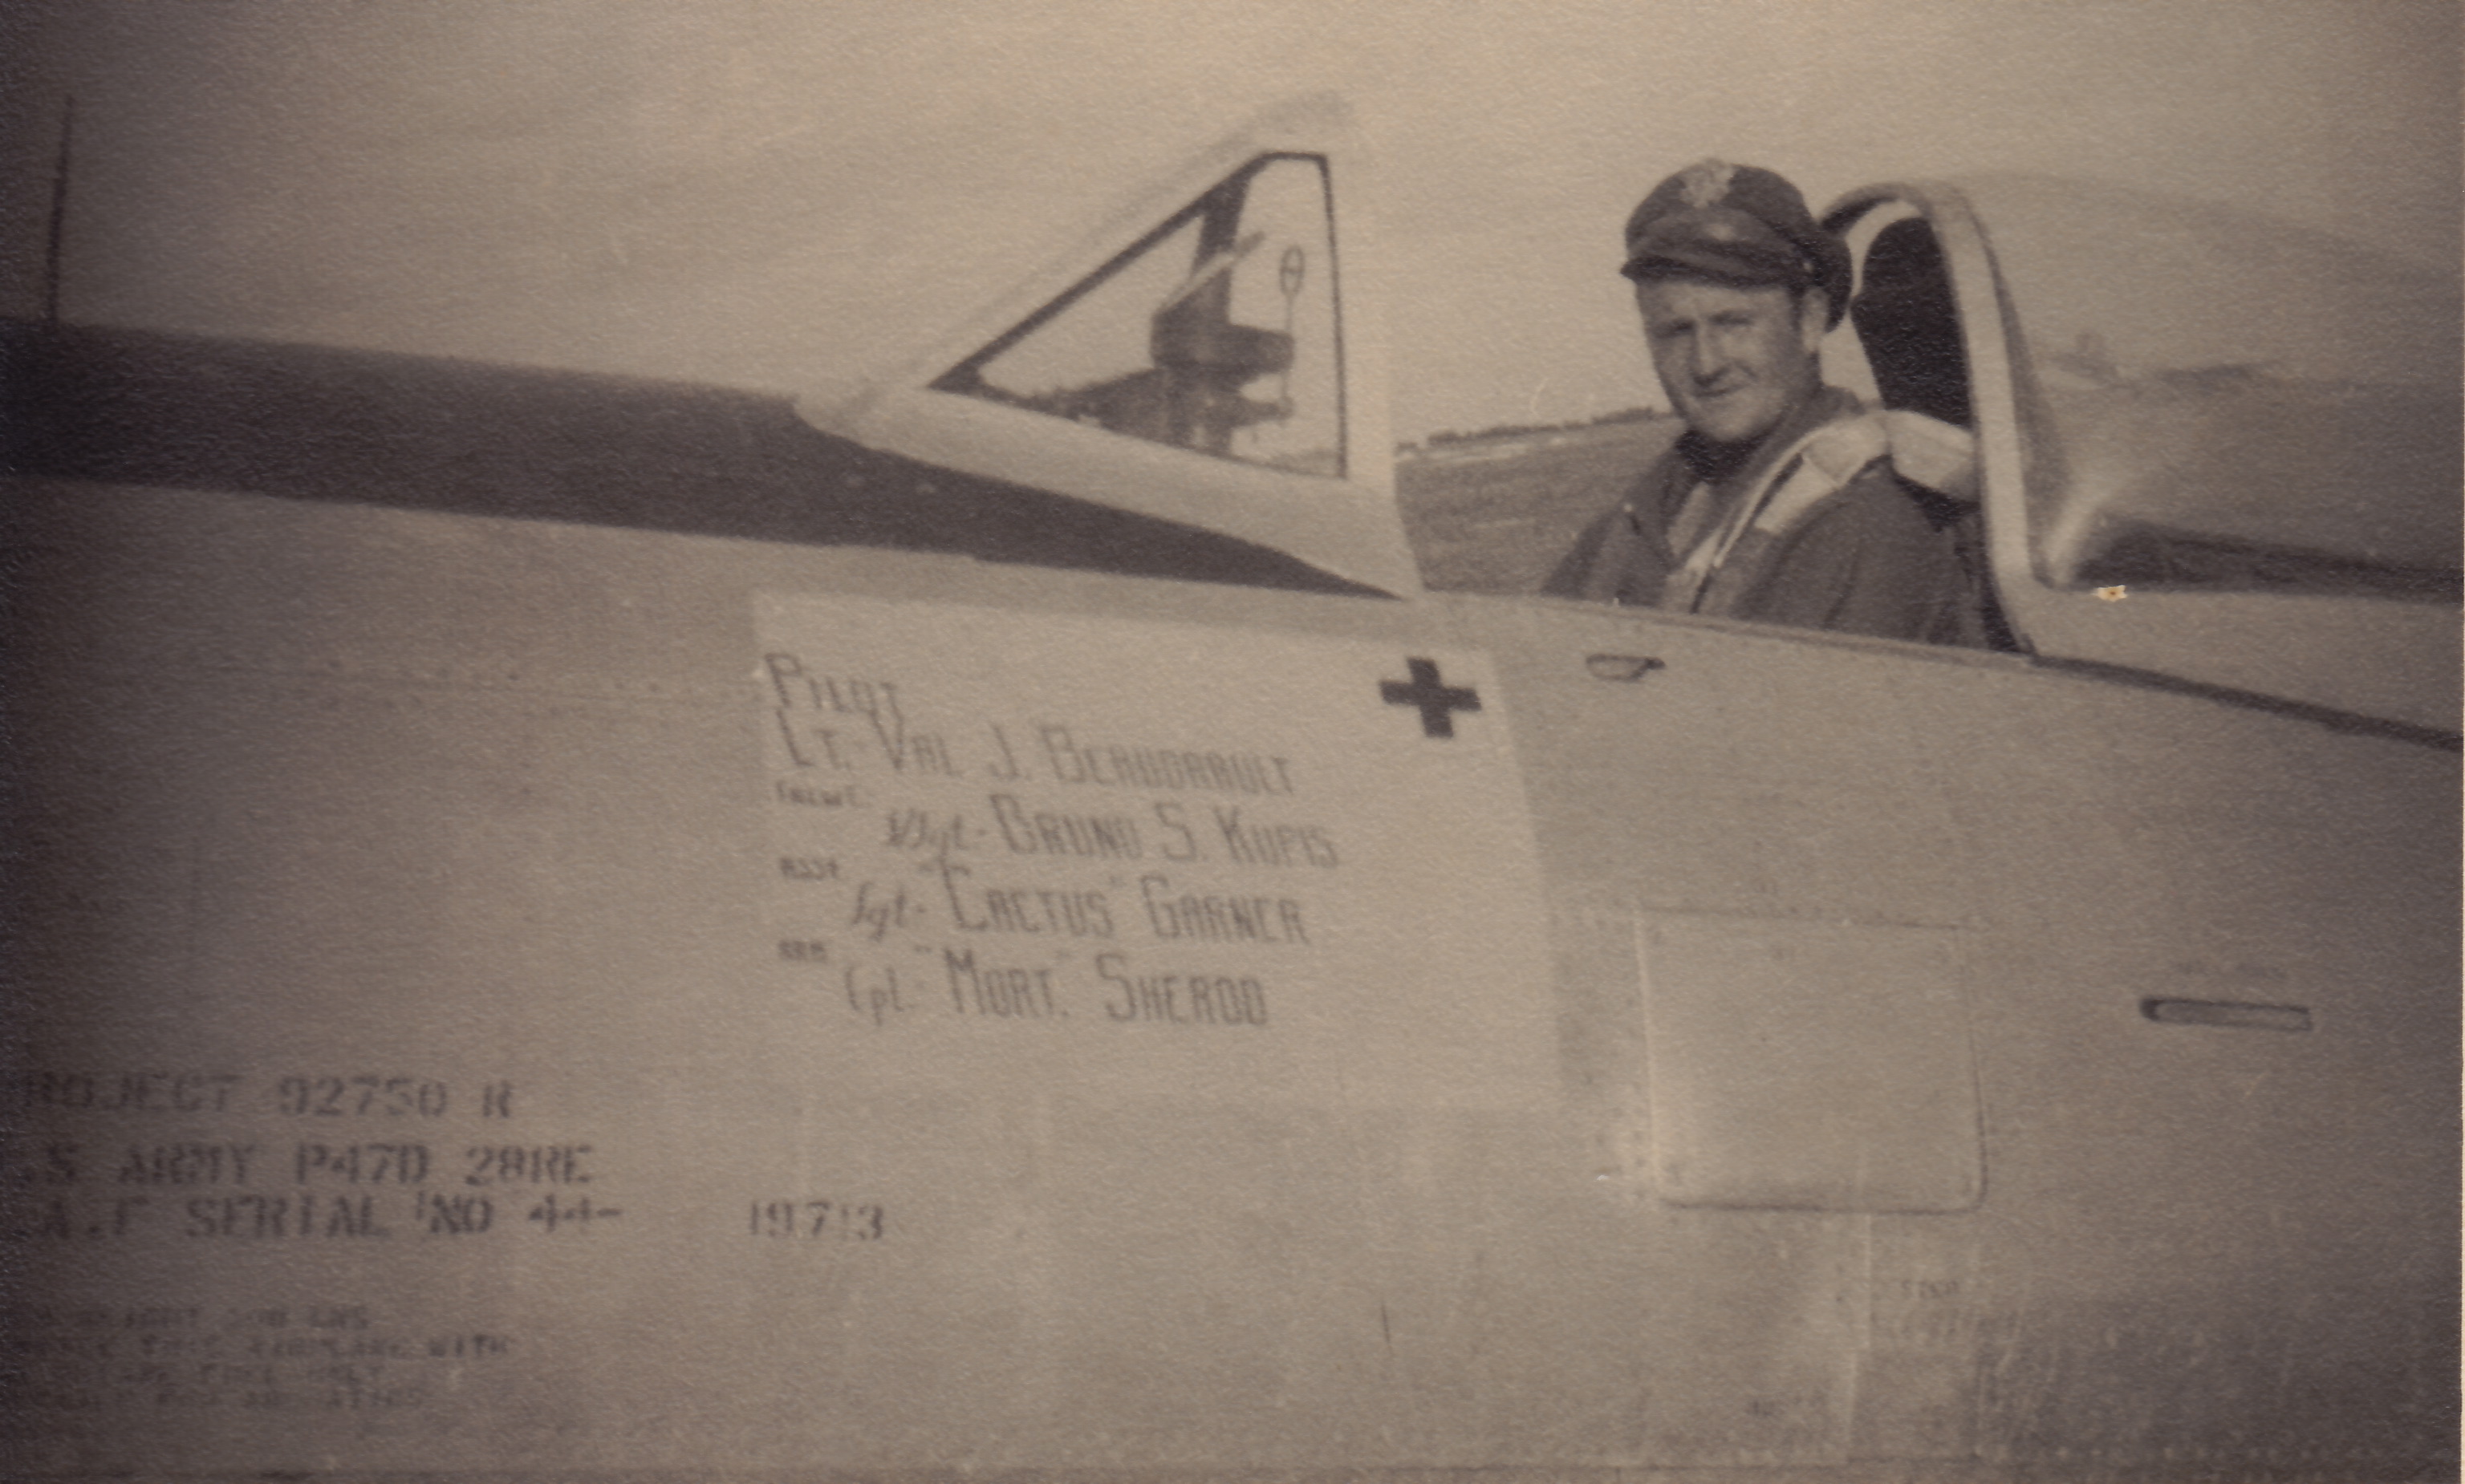  Capt Beaudrault in the cockpit of his P-47D ( Photo by Priscilla-Beaudrault's collection via Stephen Chapis).jpg